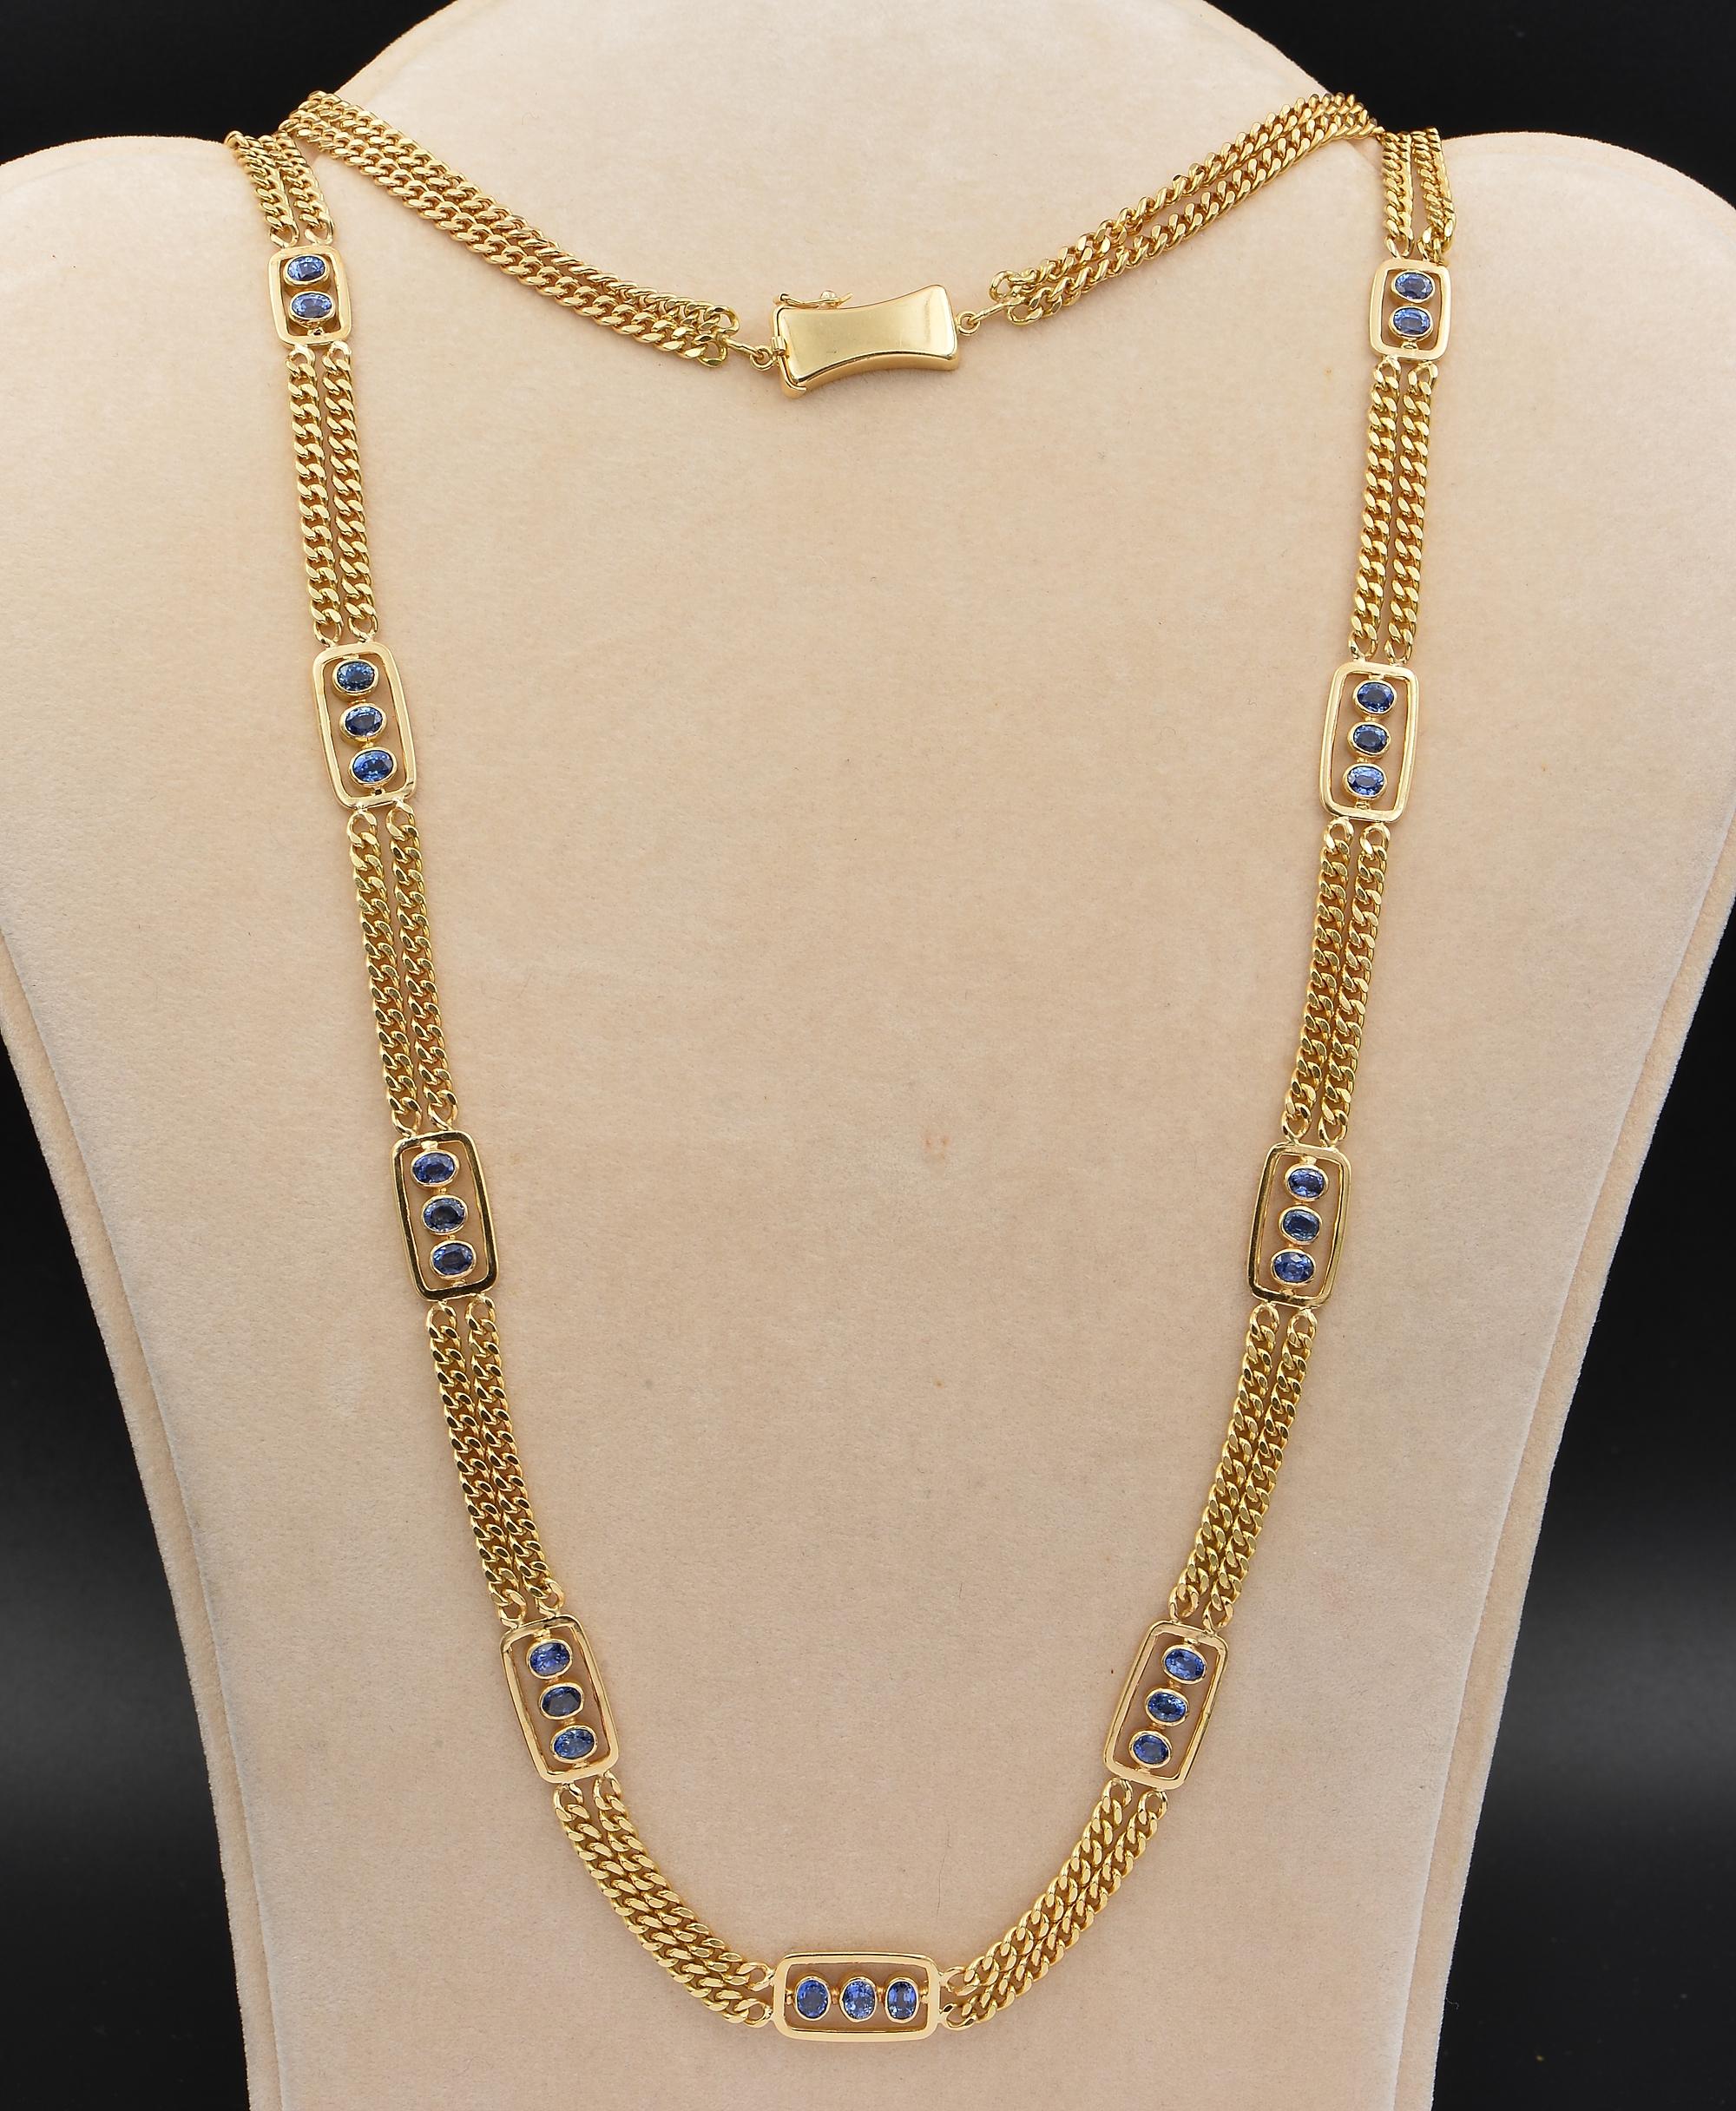 Timeless 70’s
This dynamic, sophisticate, timeless,easy wear necklace is out of 70’s
Very unique style made of double curb link long chain, interspaced by elongated rectangular sections, displaying a trio of natural Sapphires, bright cornflower